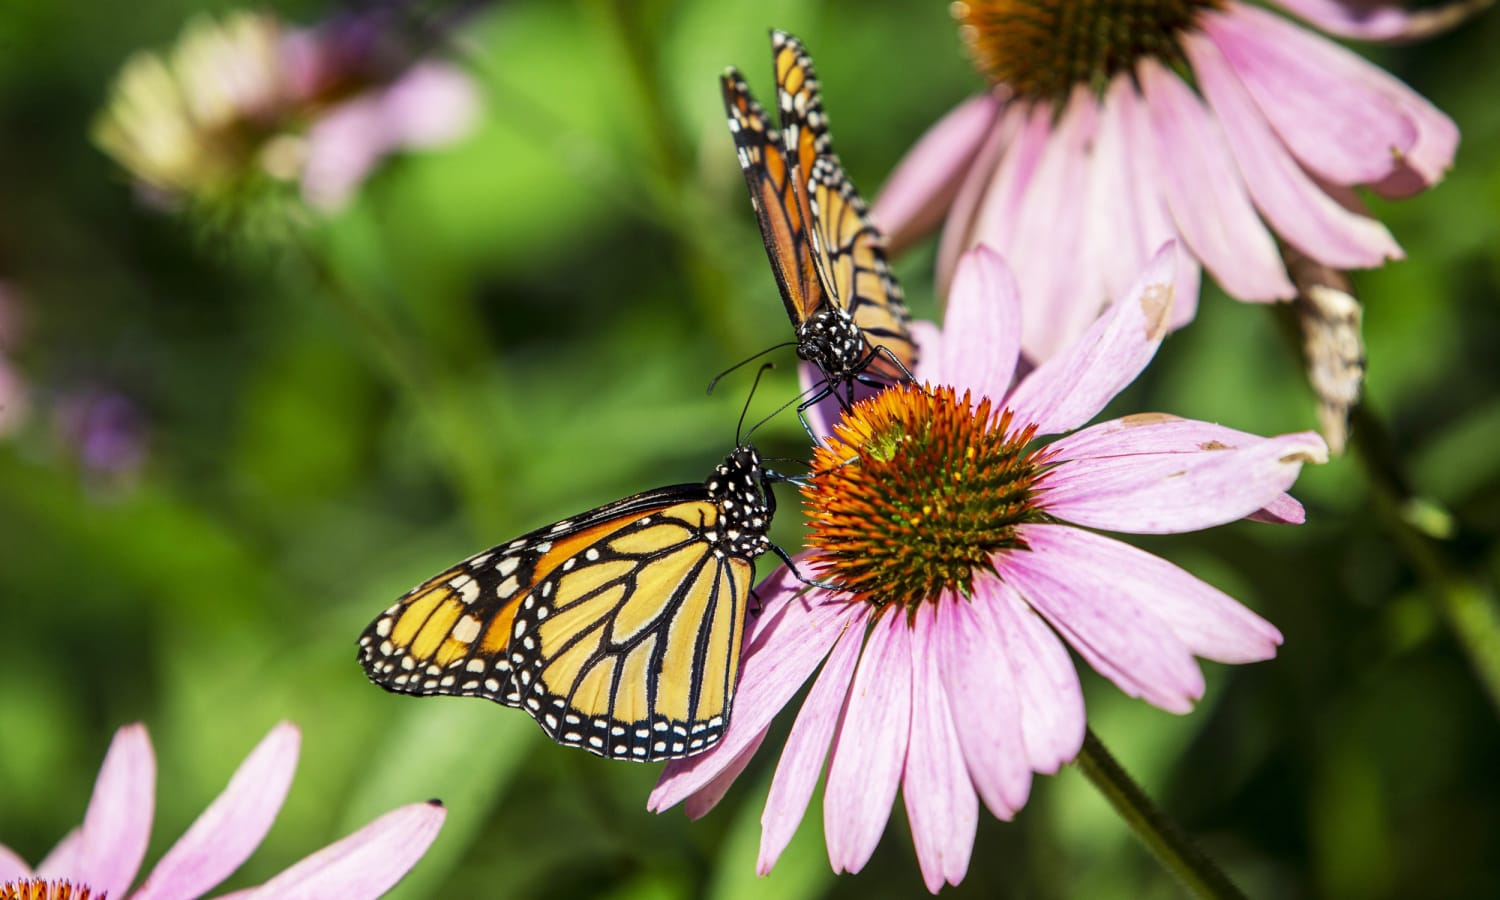 Monarch butterfly populations may be more stable than previously